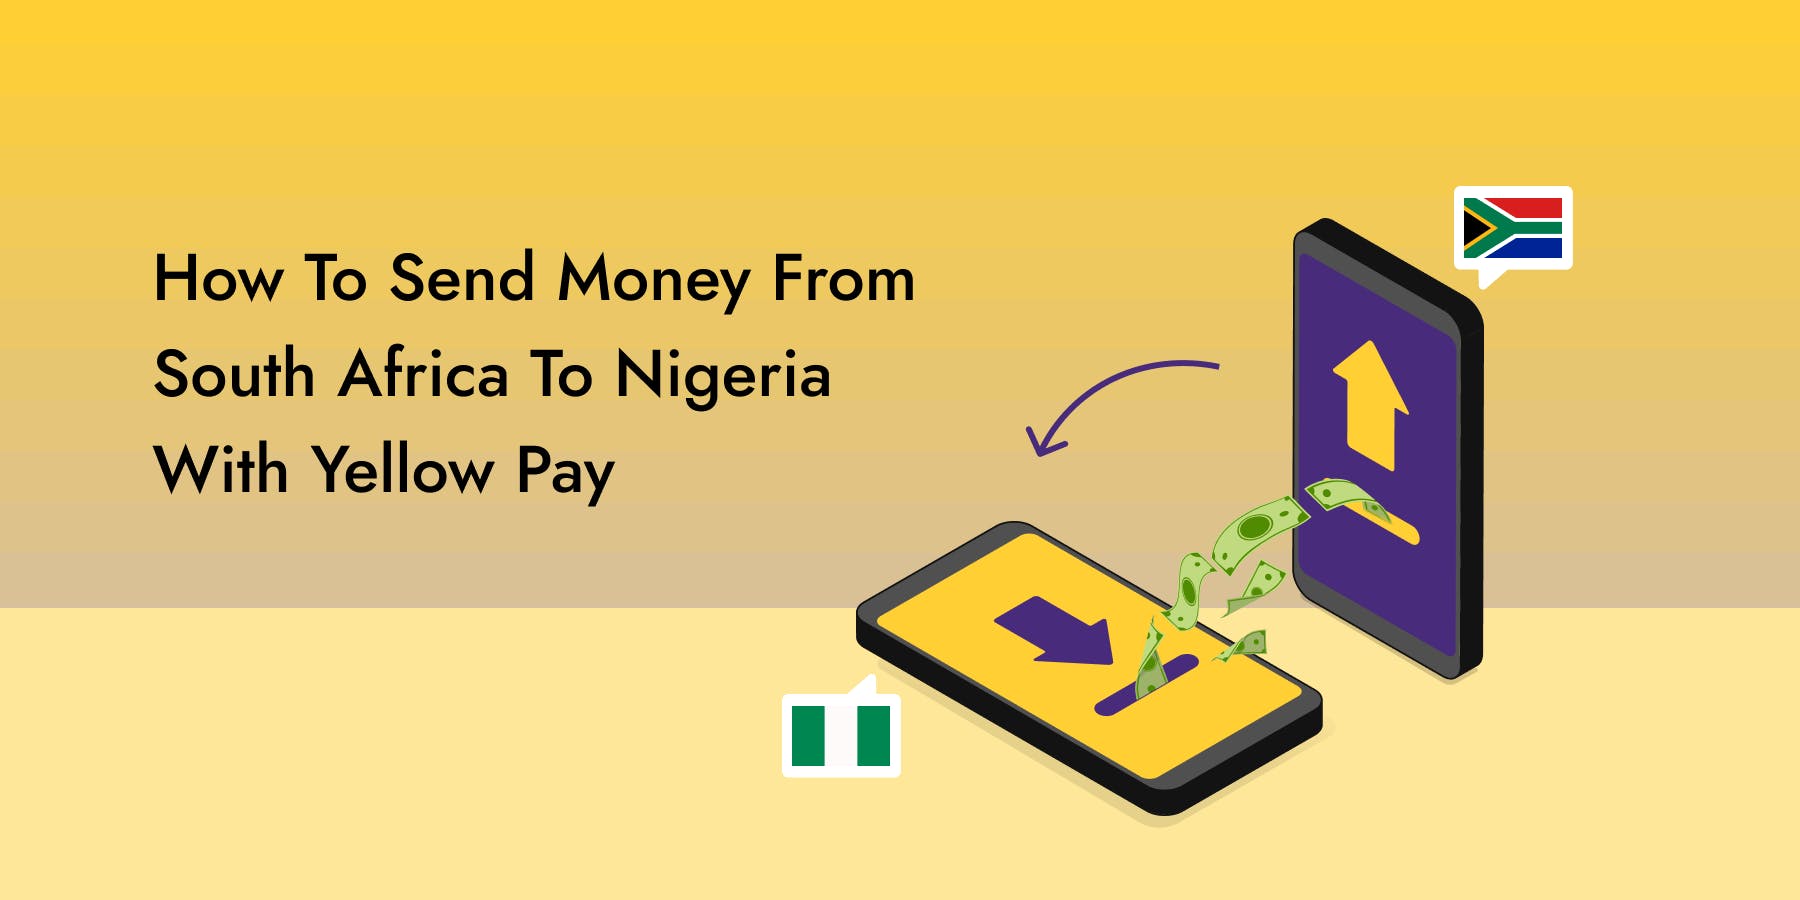 How To Send Money From South Africa To Nigeria With Yellow Pay